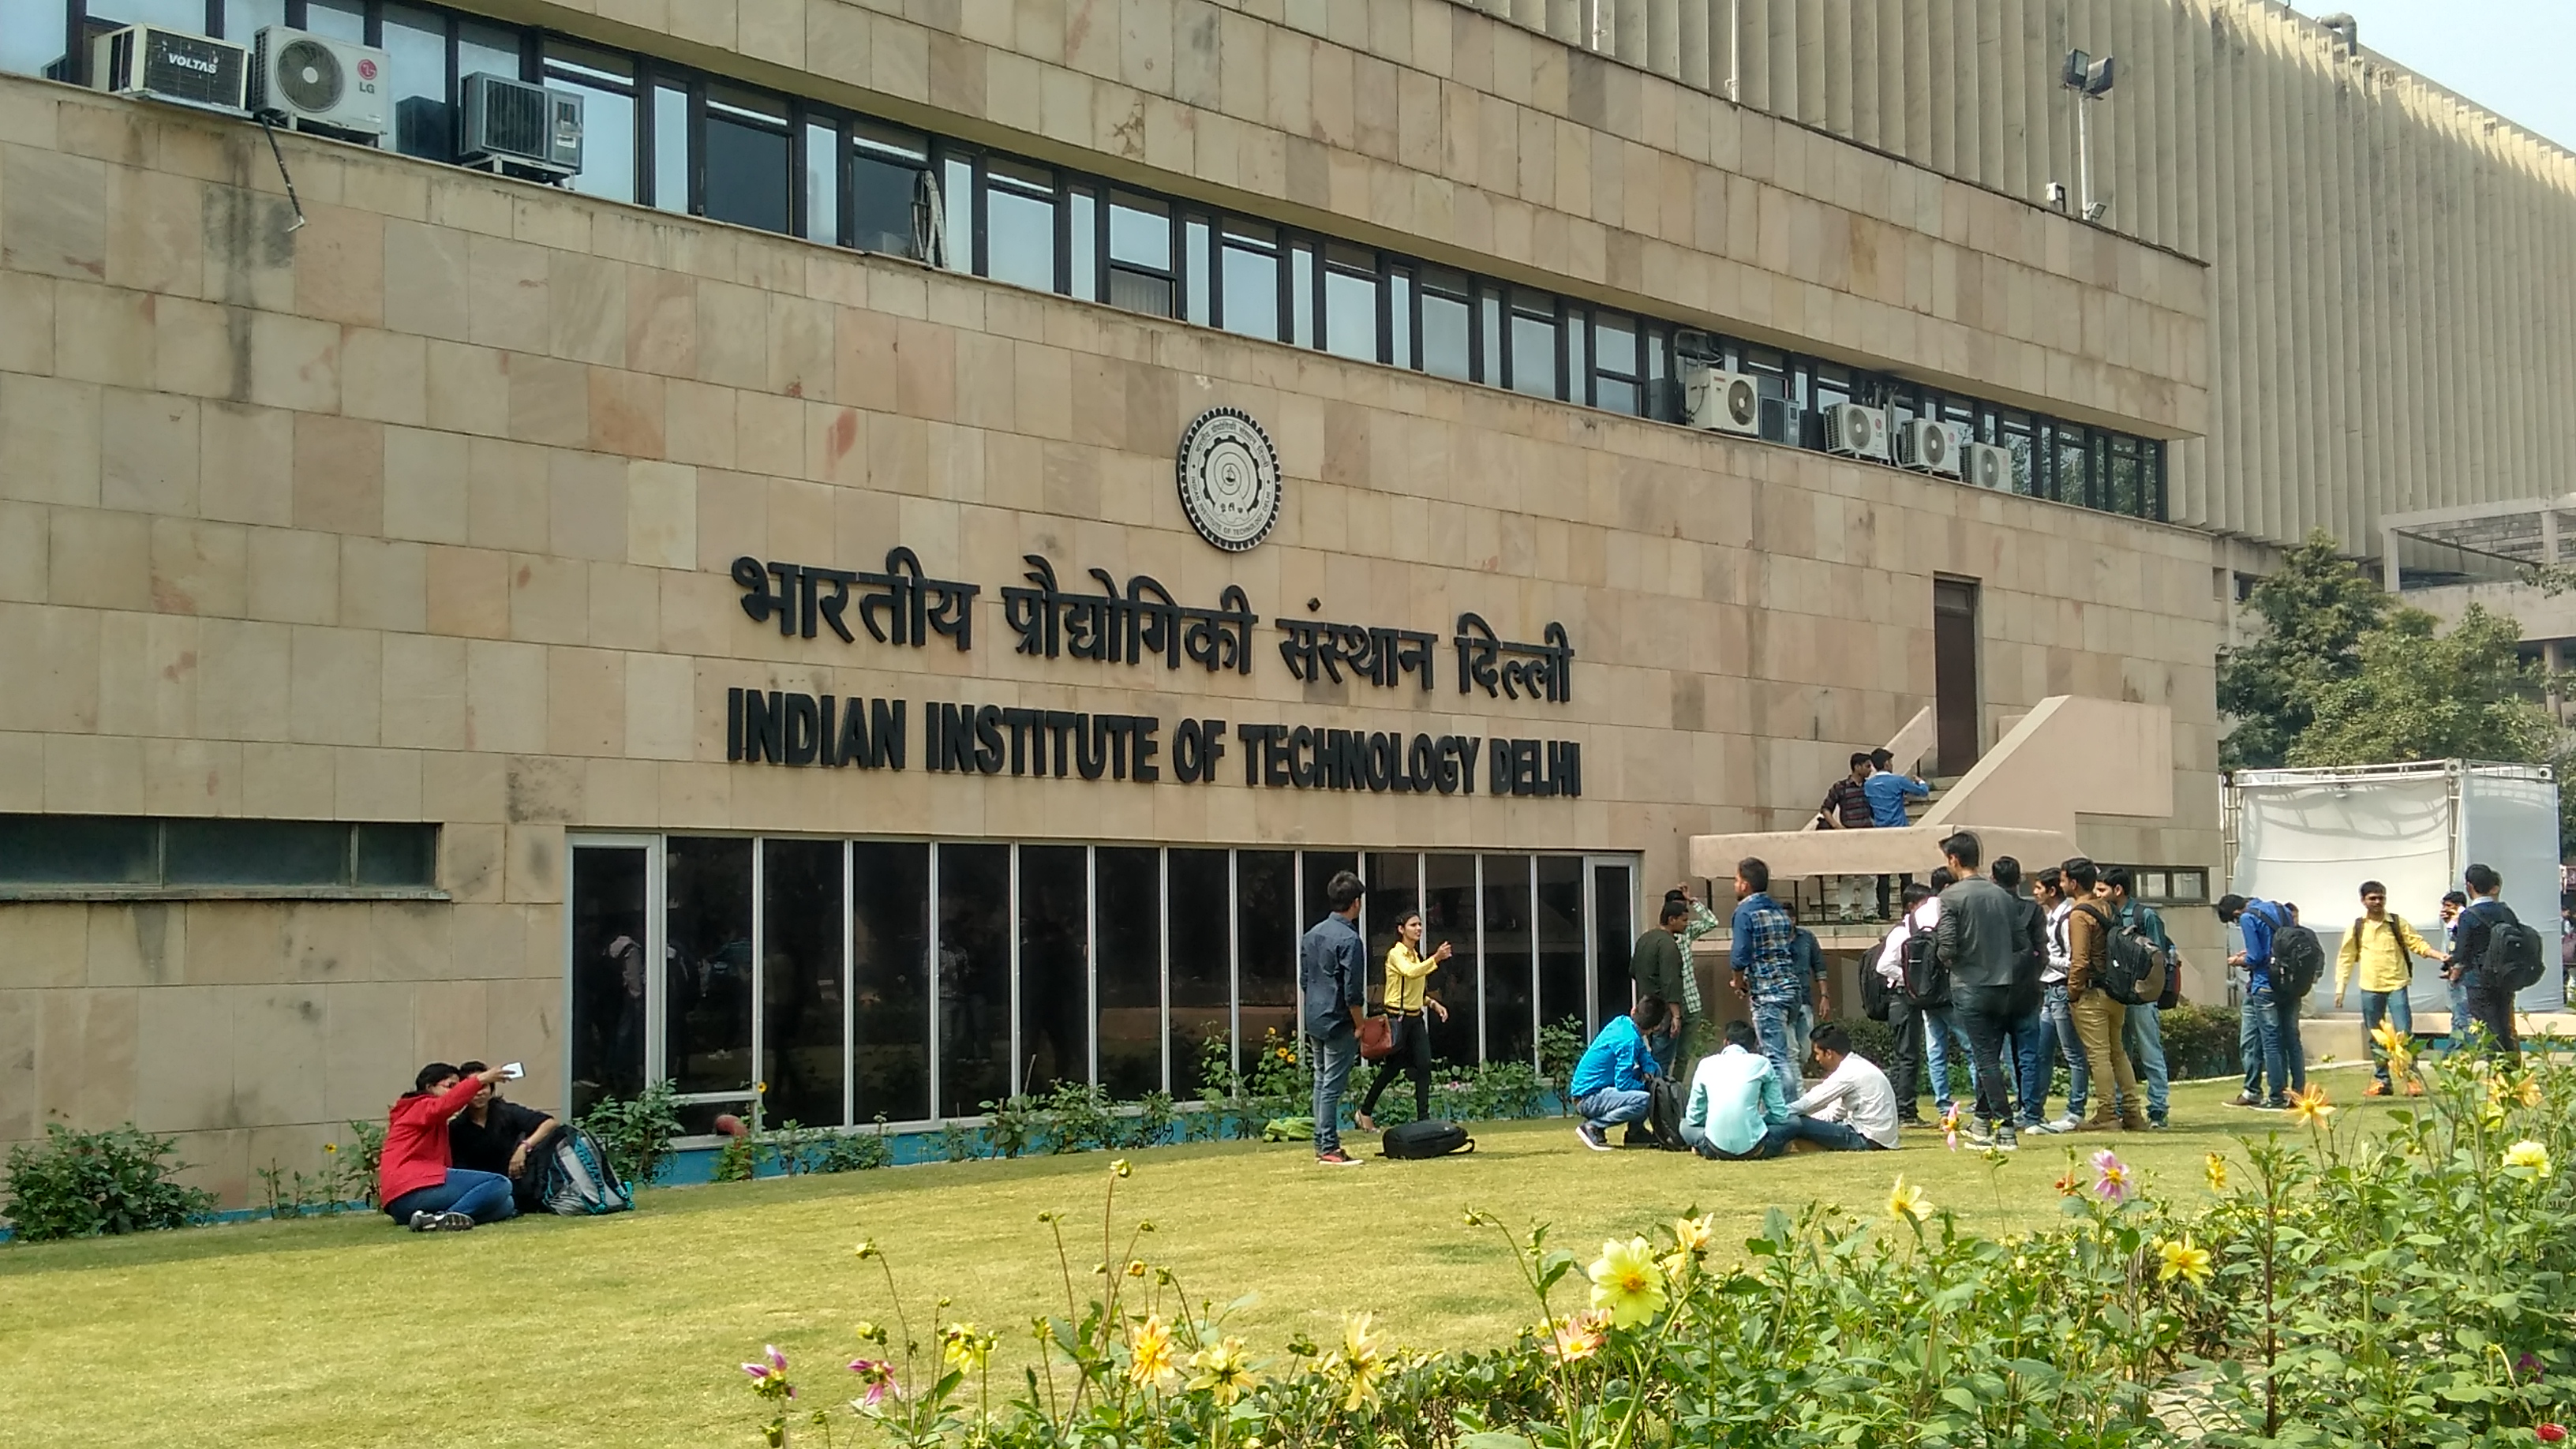 IIT Delhi Offers Free Online Course on Artificial Intelligence: How to Apply